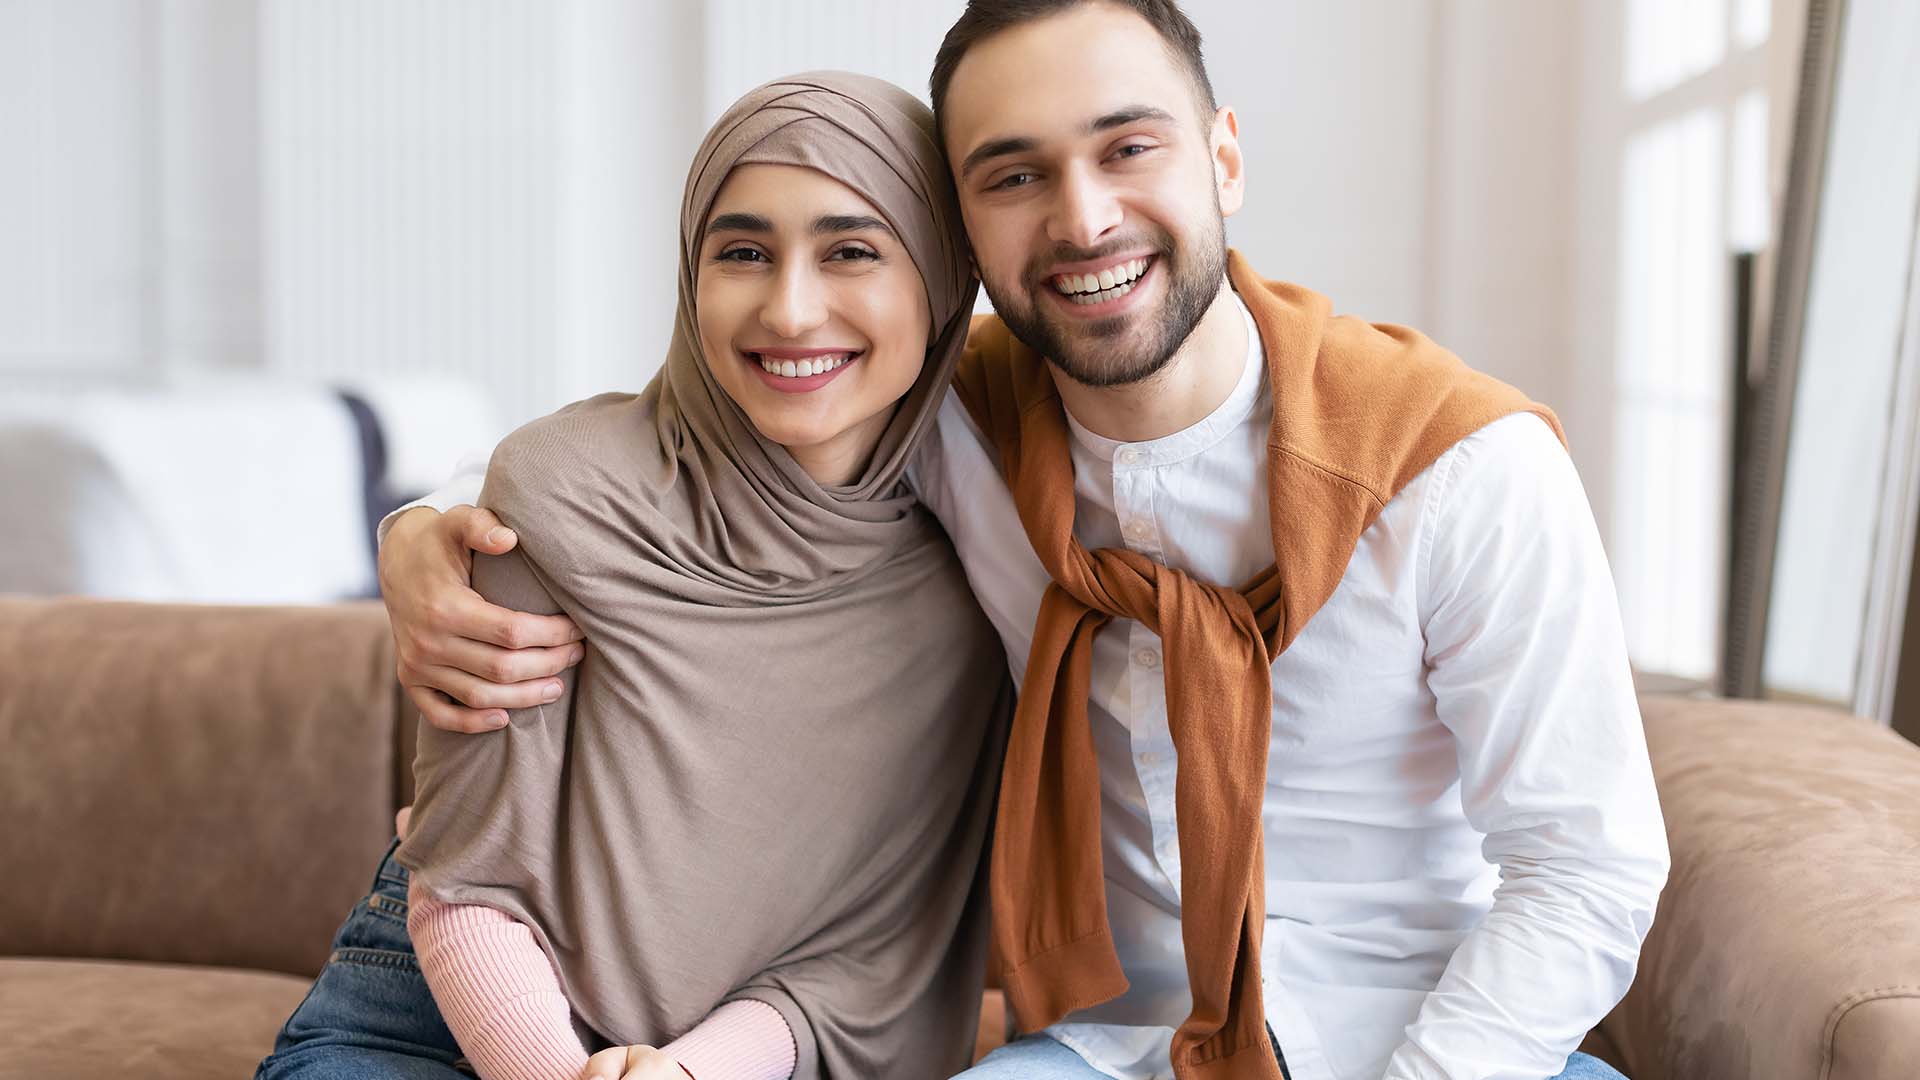 Brunette man with 5 o'clock shadow hugging a woman wearing a grey hijab next to him. Both are smiling while sitting on couch.